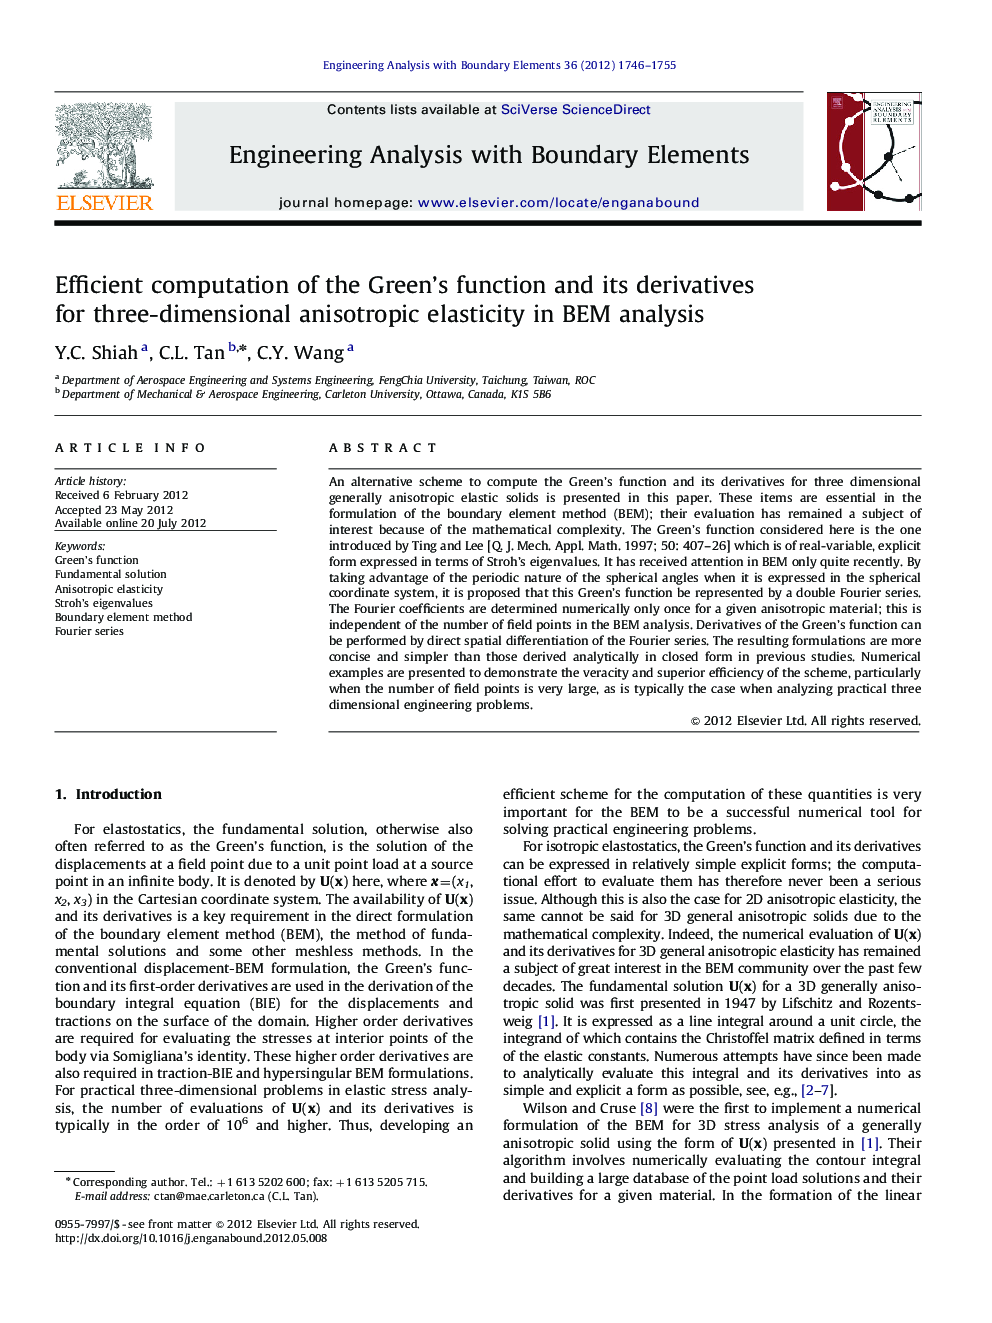 Efficient computation of the Green's function and its derivatives for three-dimensional anisotropic elasticity in BEM analysis